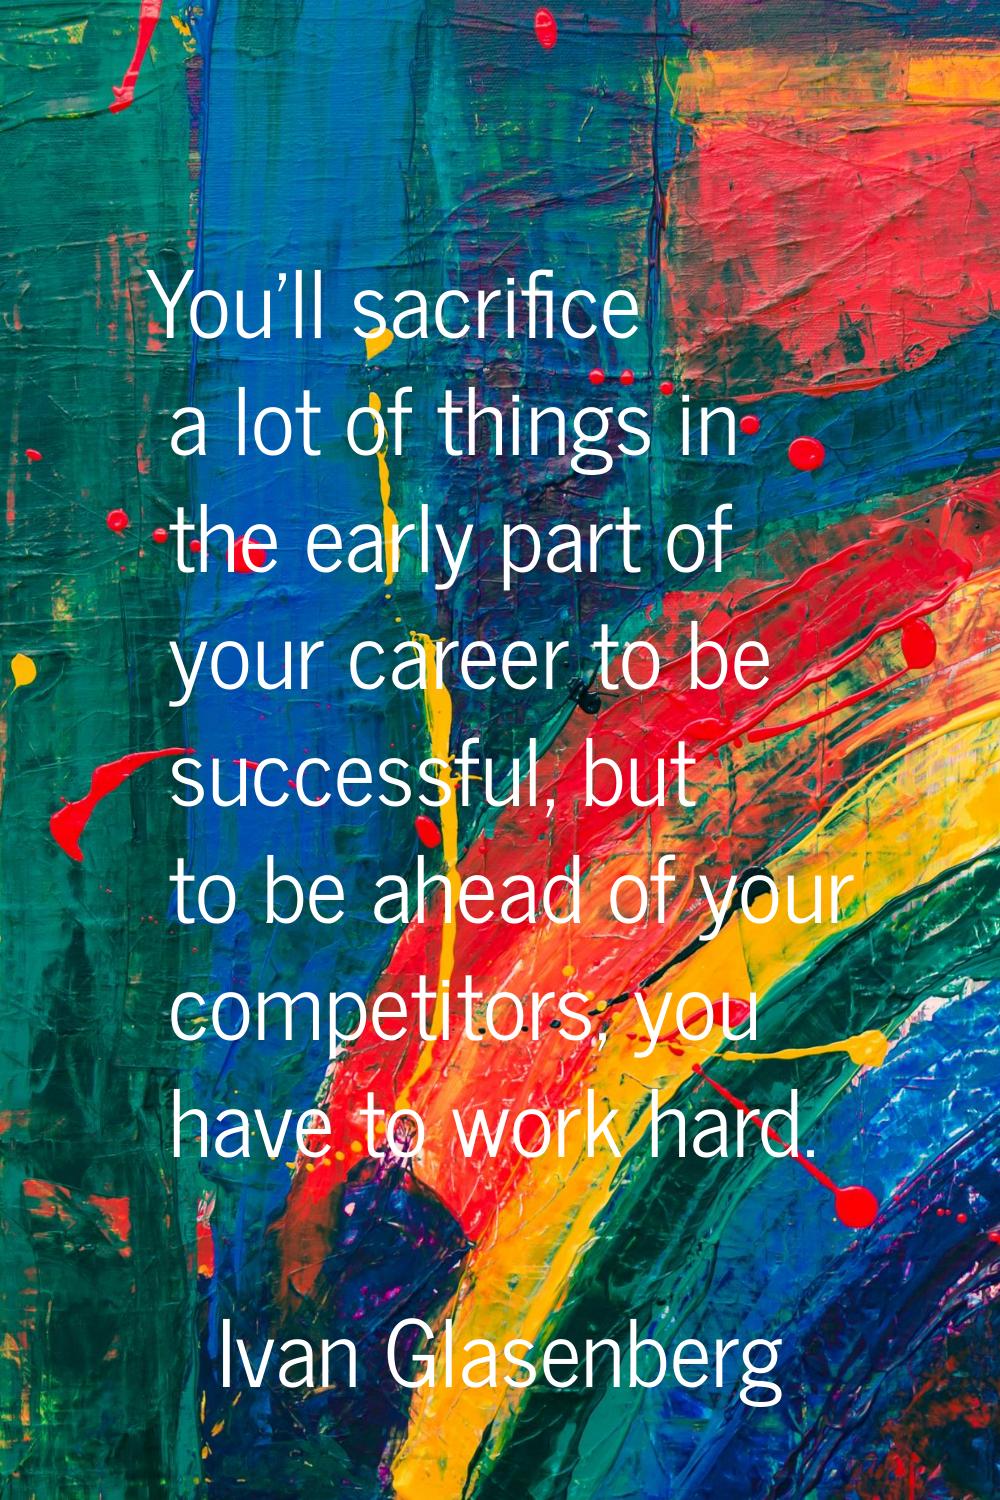 You'll sacrifice a lot of things in the early part of your career to be successful, but to be ahead